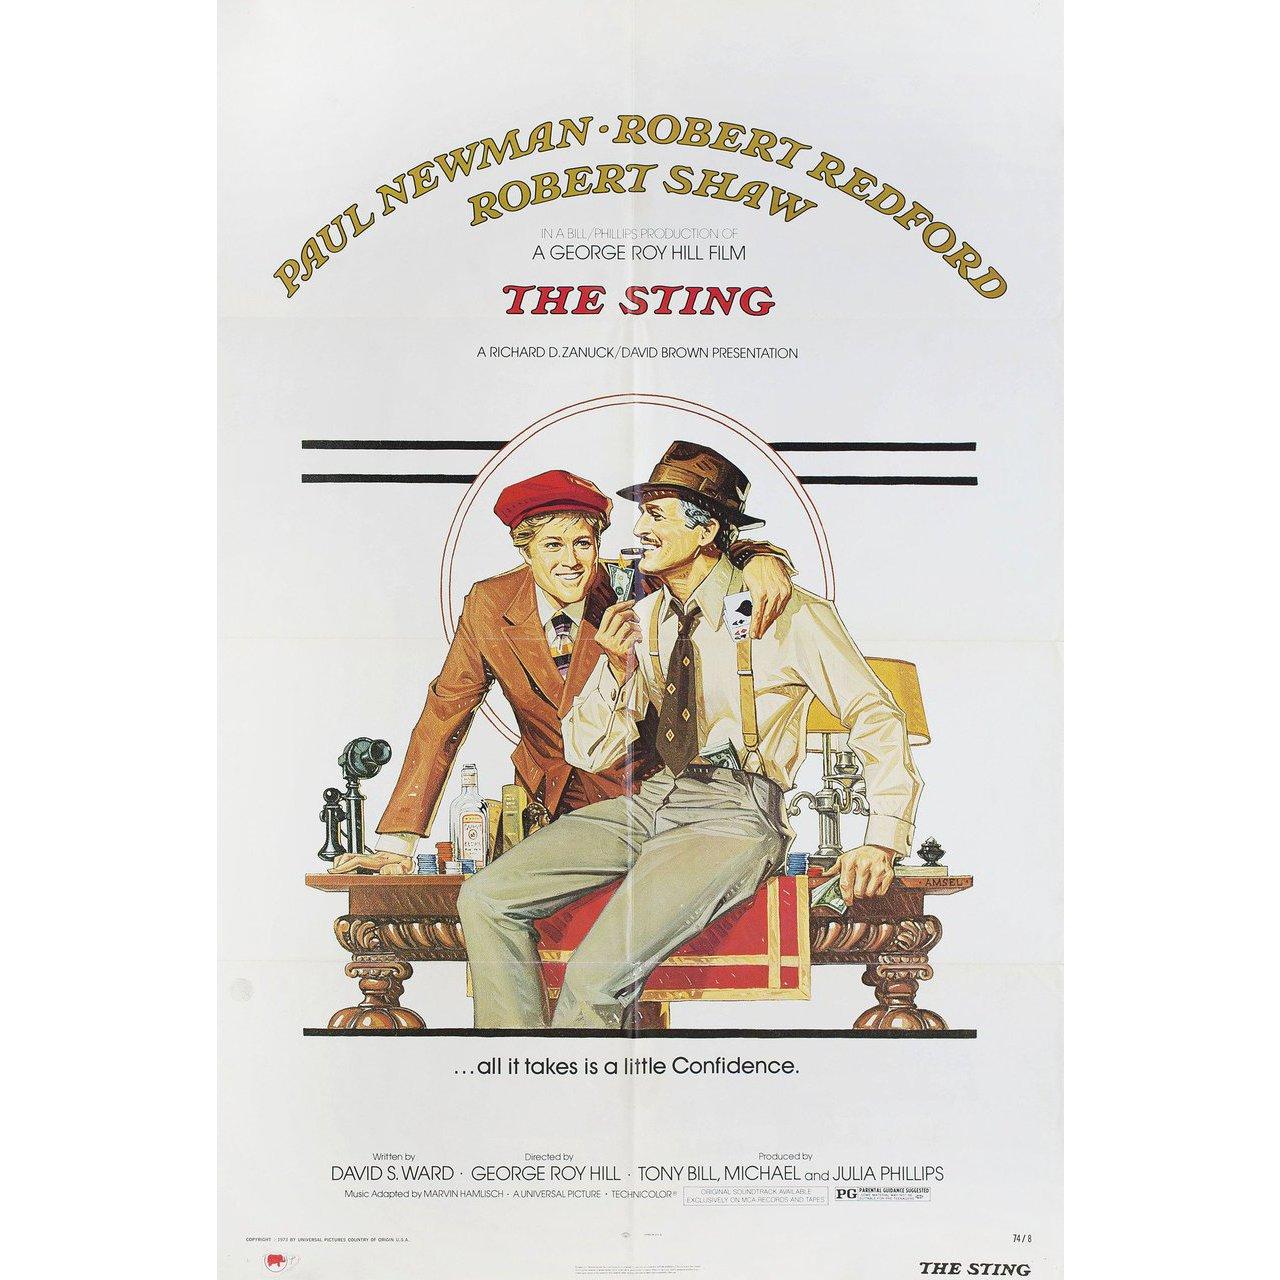 Original 1973 U.S. one sheet poster by Richard Amsel / Bill Gold for the film ‘The Sting’ directed by George Roy Hill with Paul Newman / Robert Redford / Robert Shaw / Charles Durning. Very good-fine condition, folded. Many original posters were